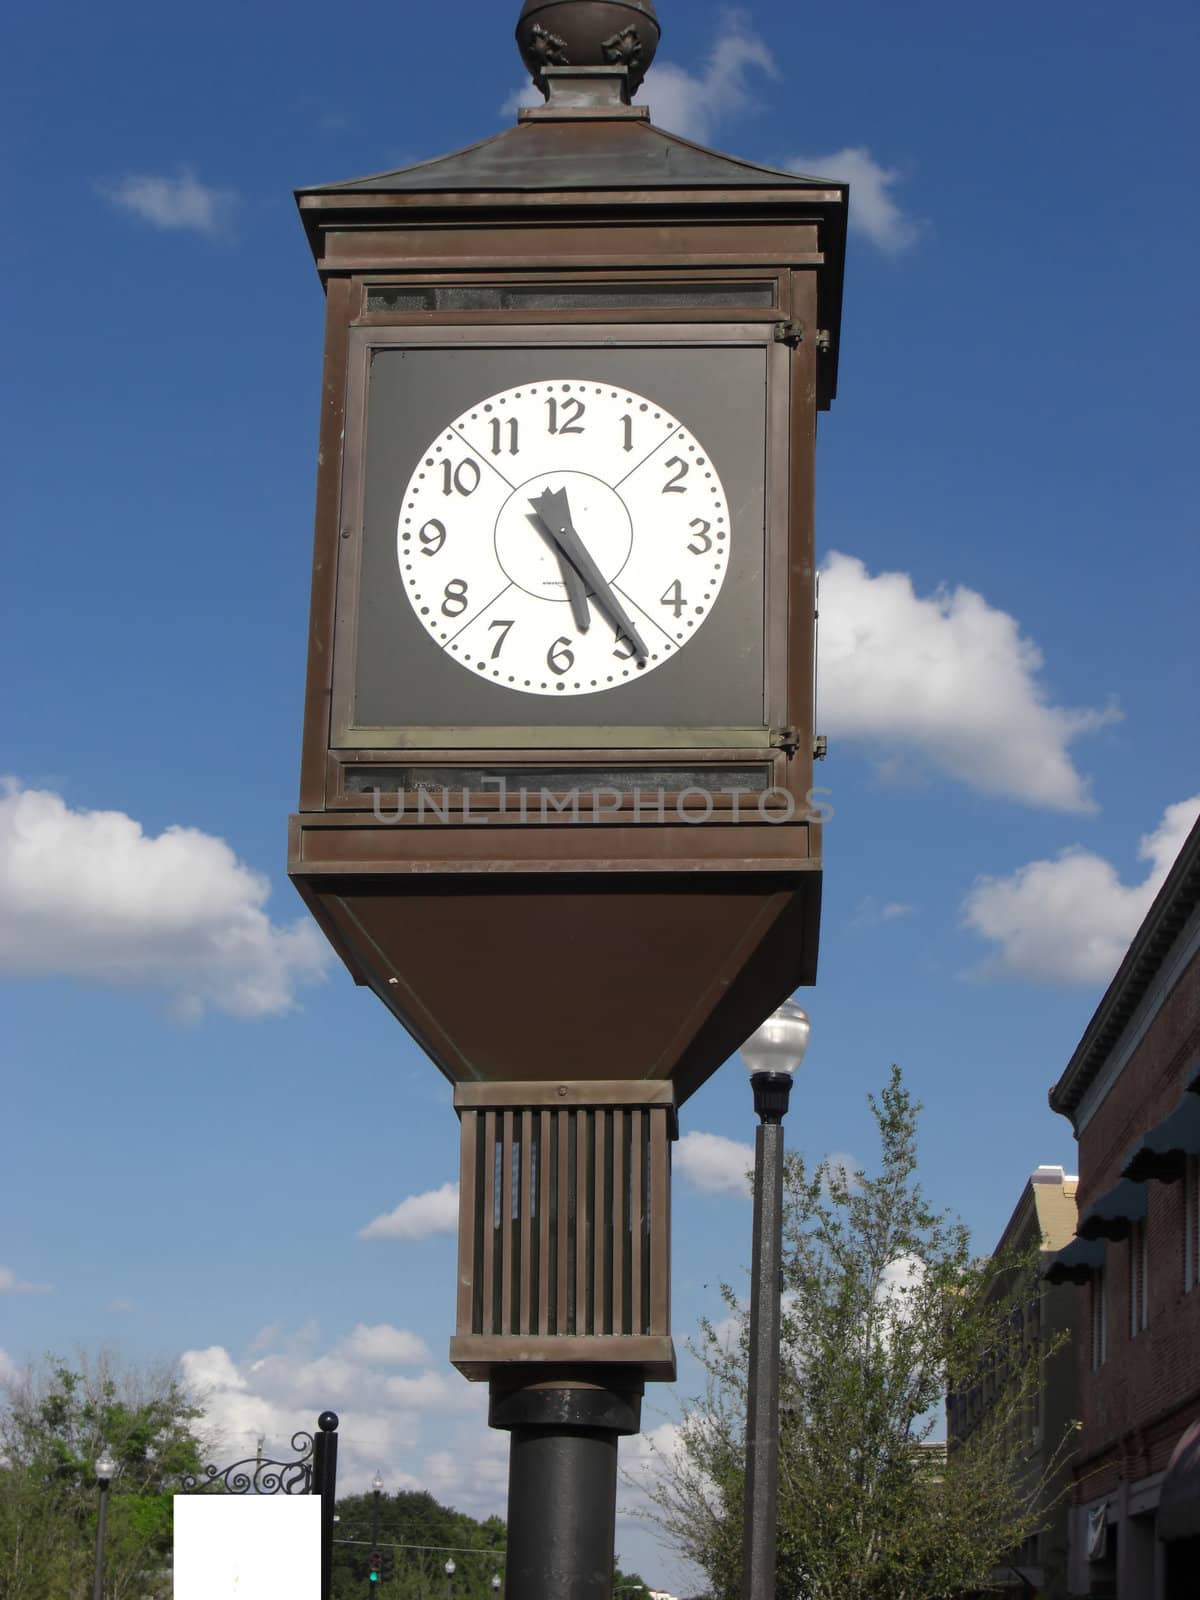 A big clock is standing tall on the side of a street in a city center.